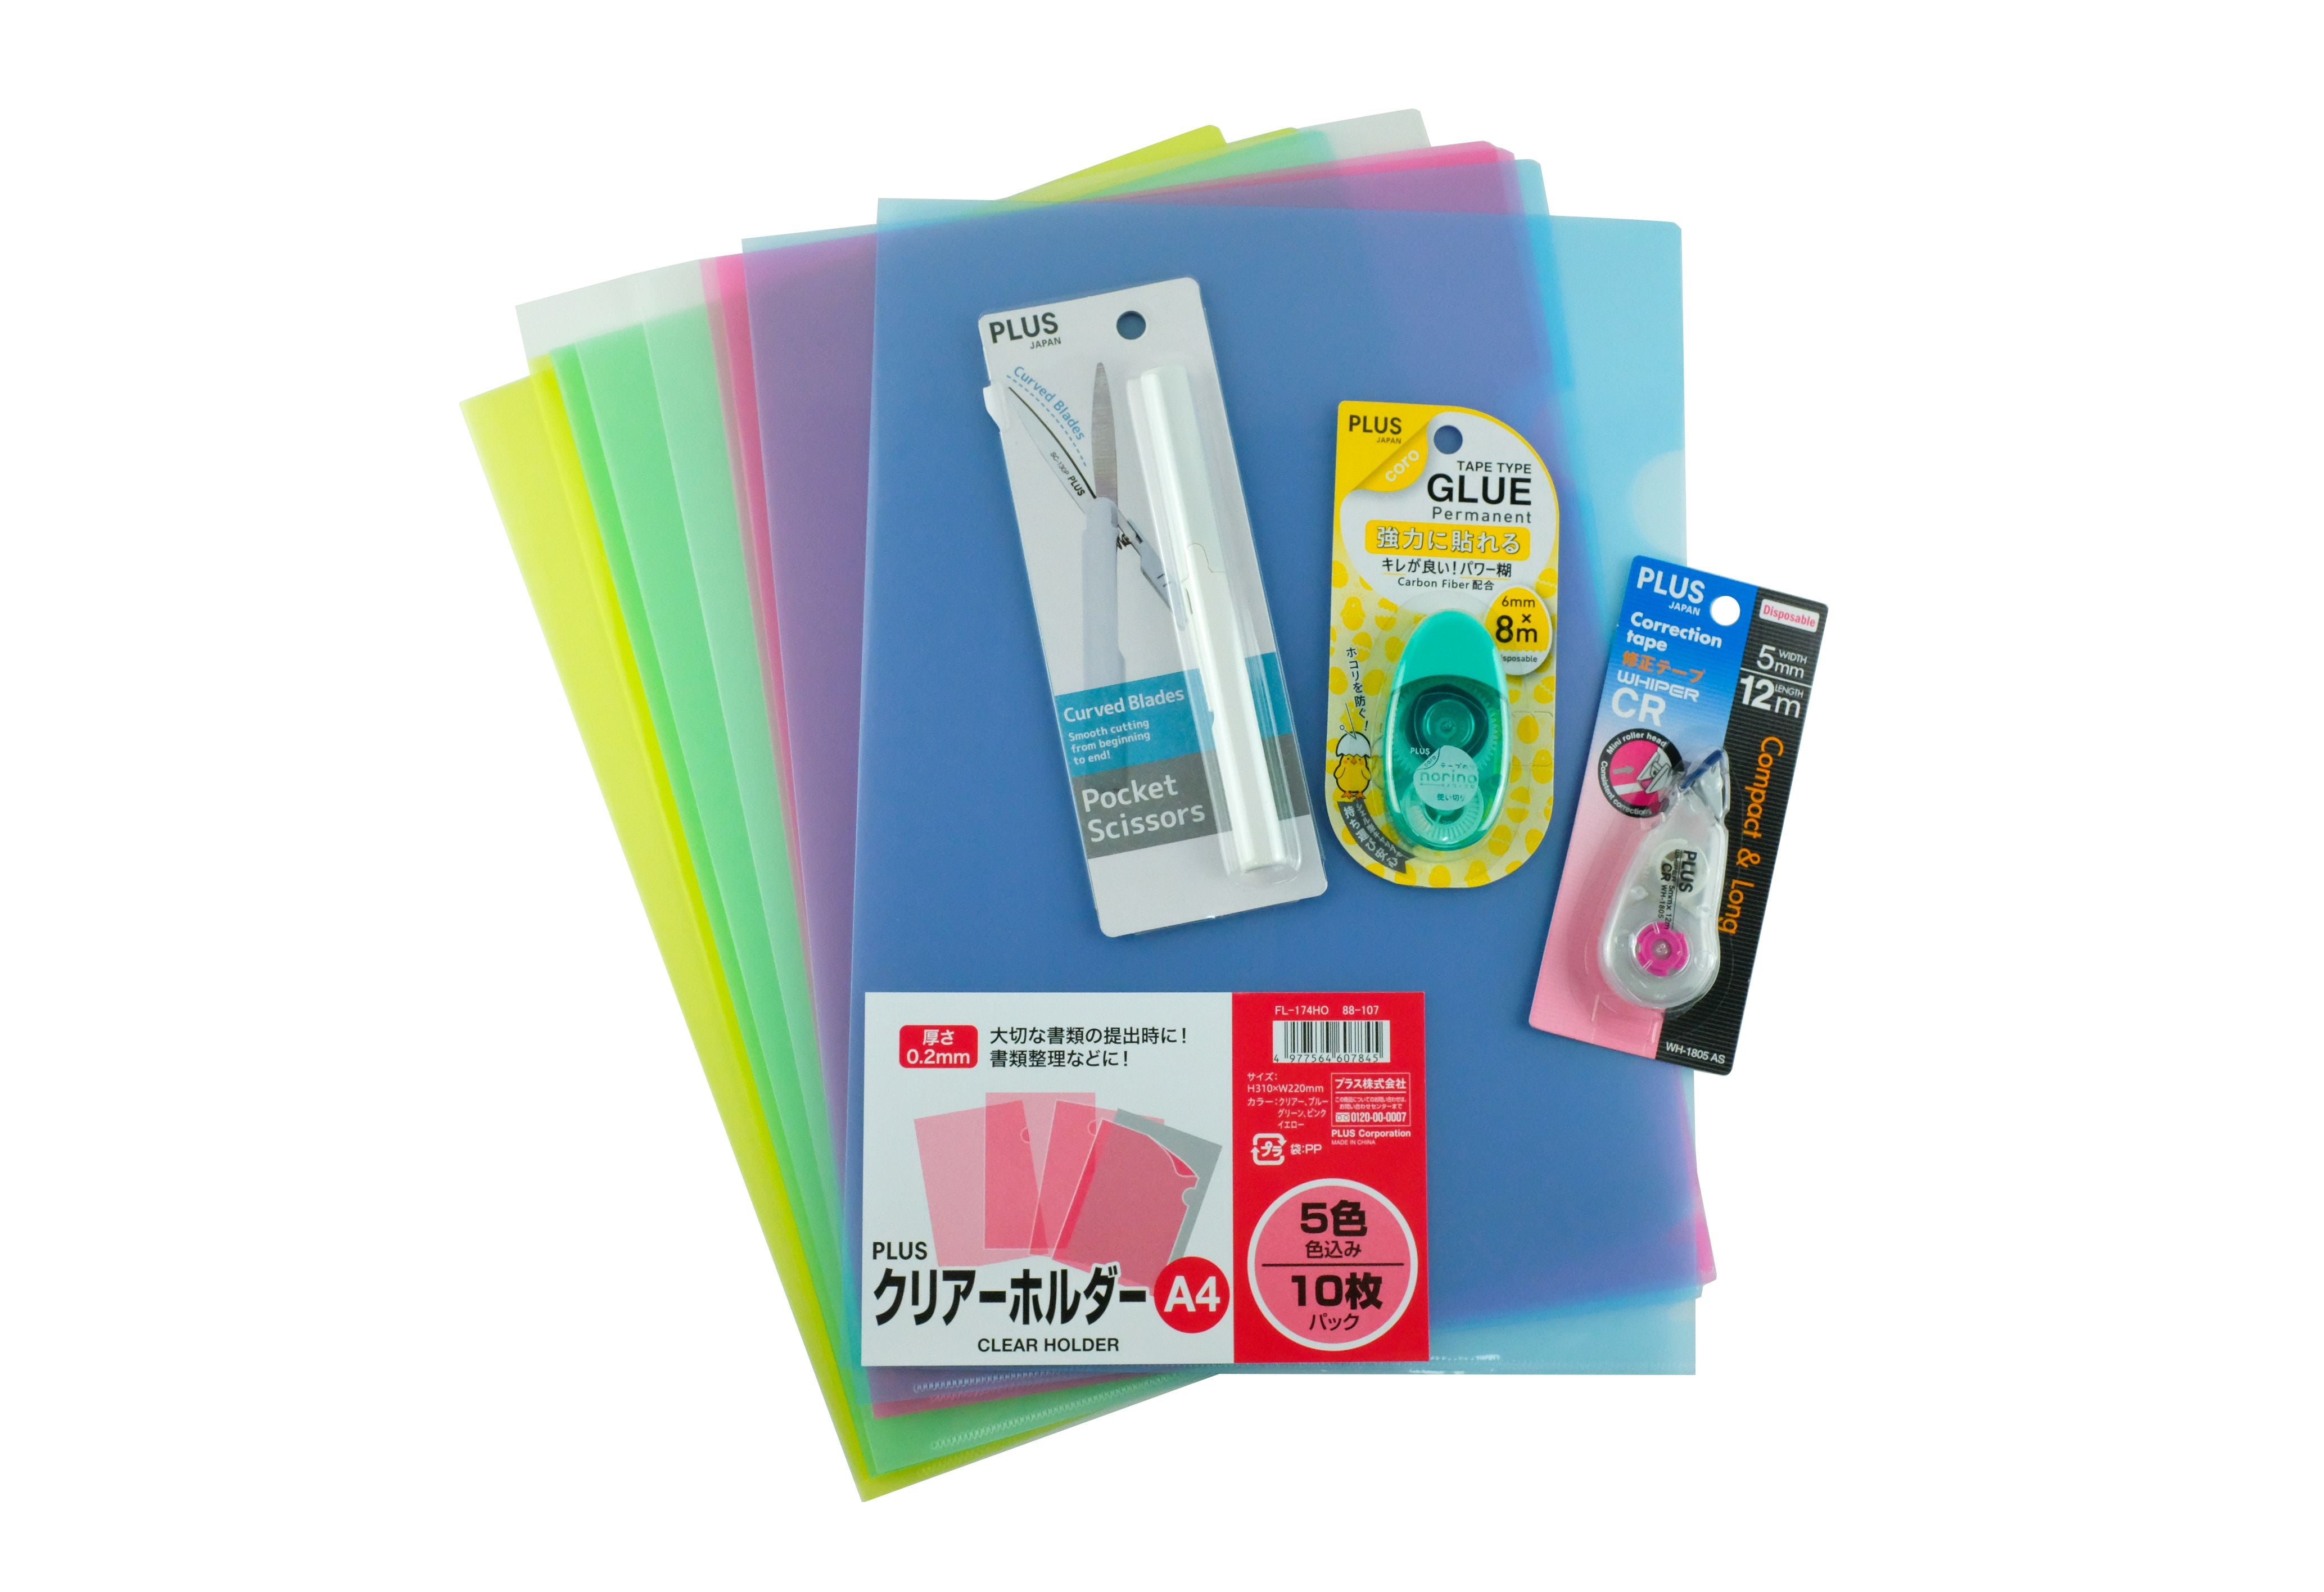 PLUS Stationery Value Pack - _MS, ECTL-AUG23, ECTL-HOTBUY60, PLUS